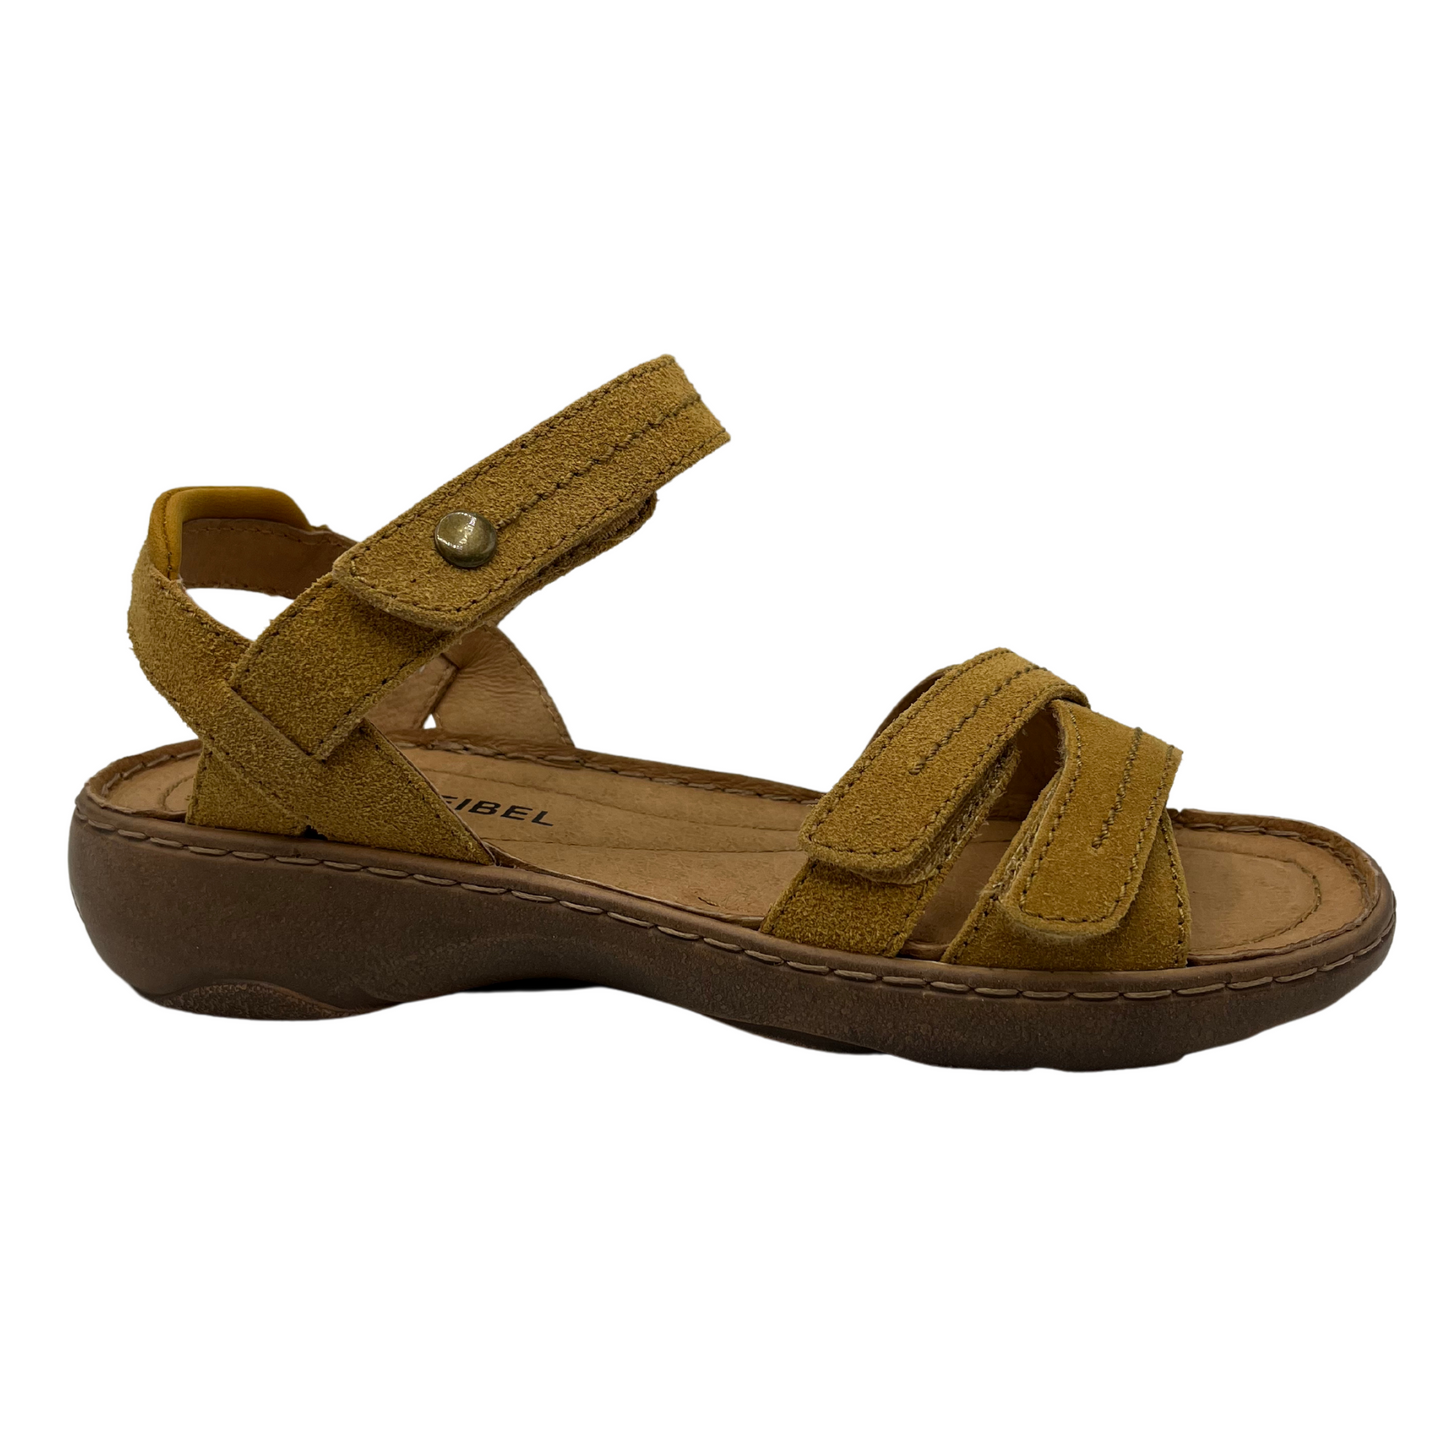 Right facing view of tan leather suede sandal with multiple adjustable straps and open toe